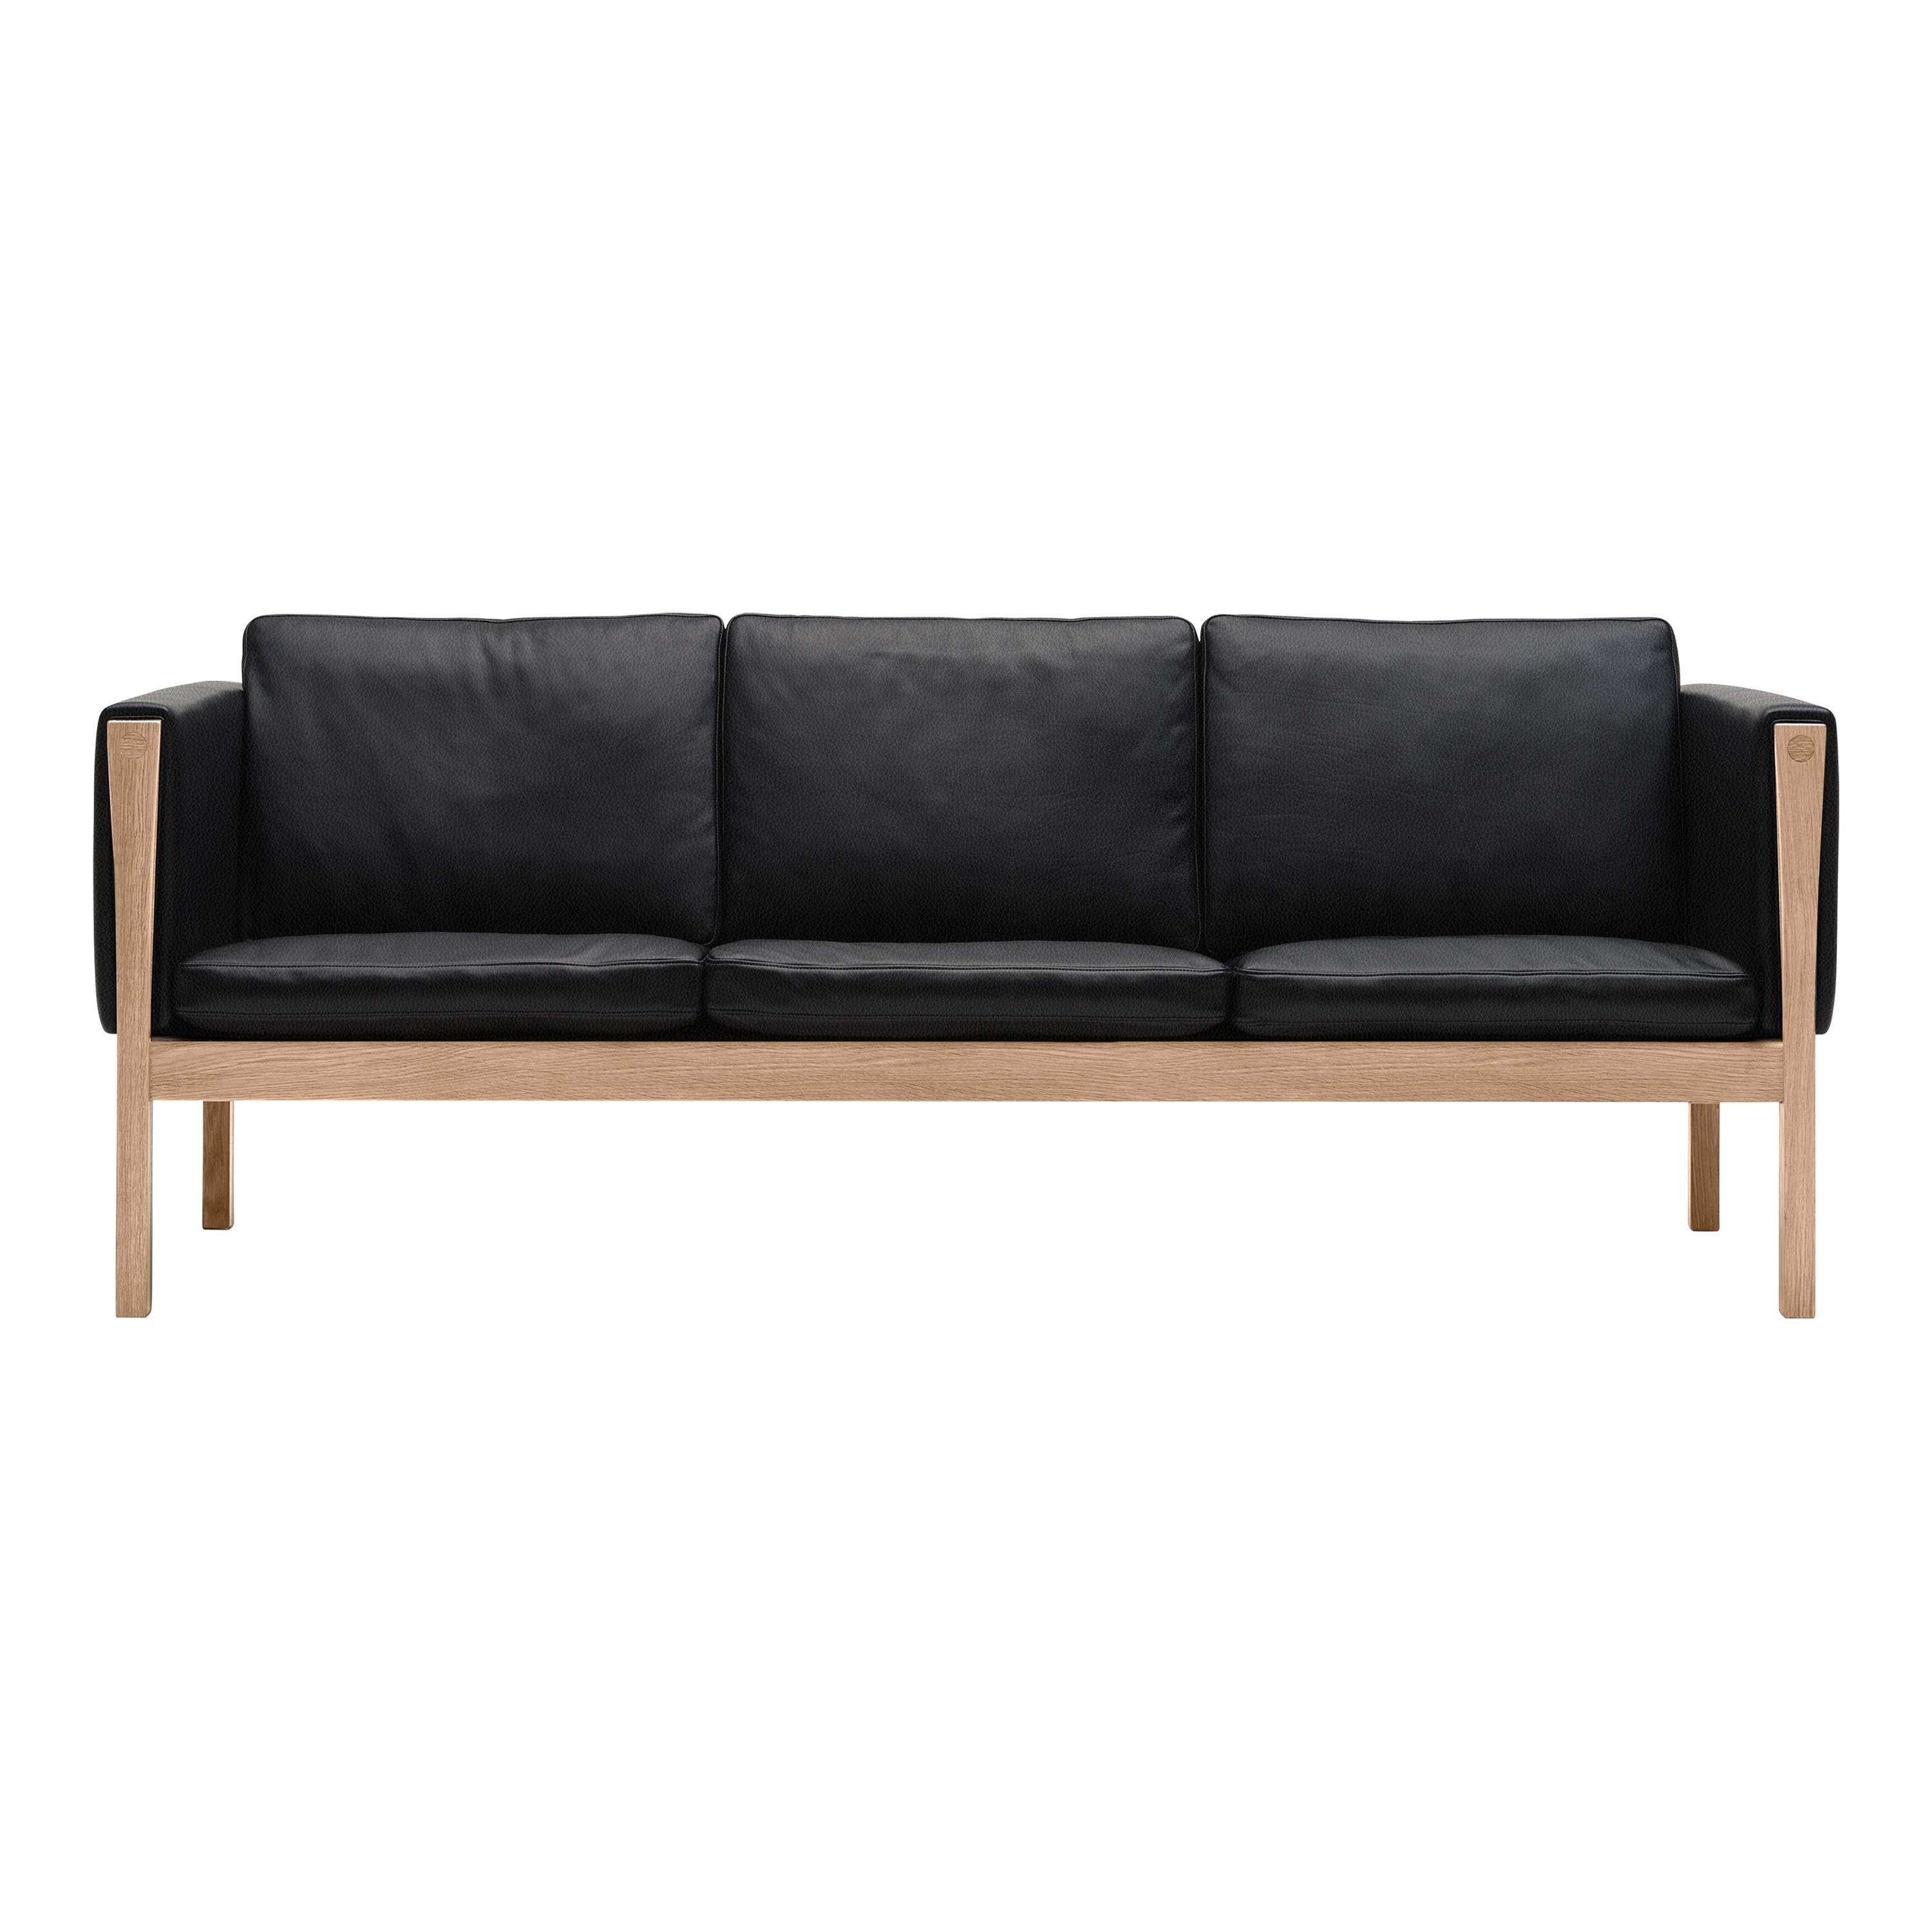 CH163 Sofa in Oiled Oak Frame with Leather Upholstery by Hans J. Wegner